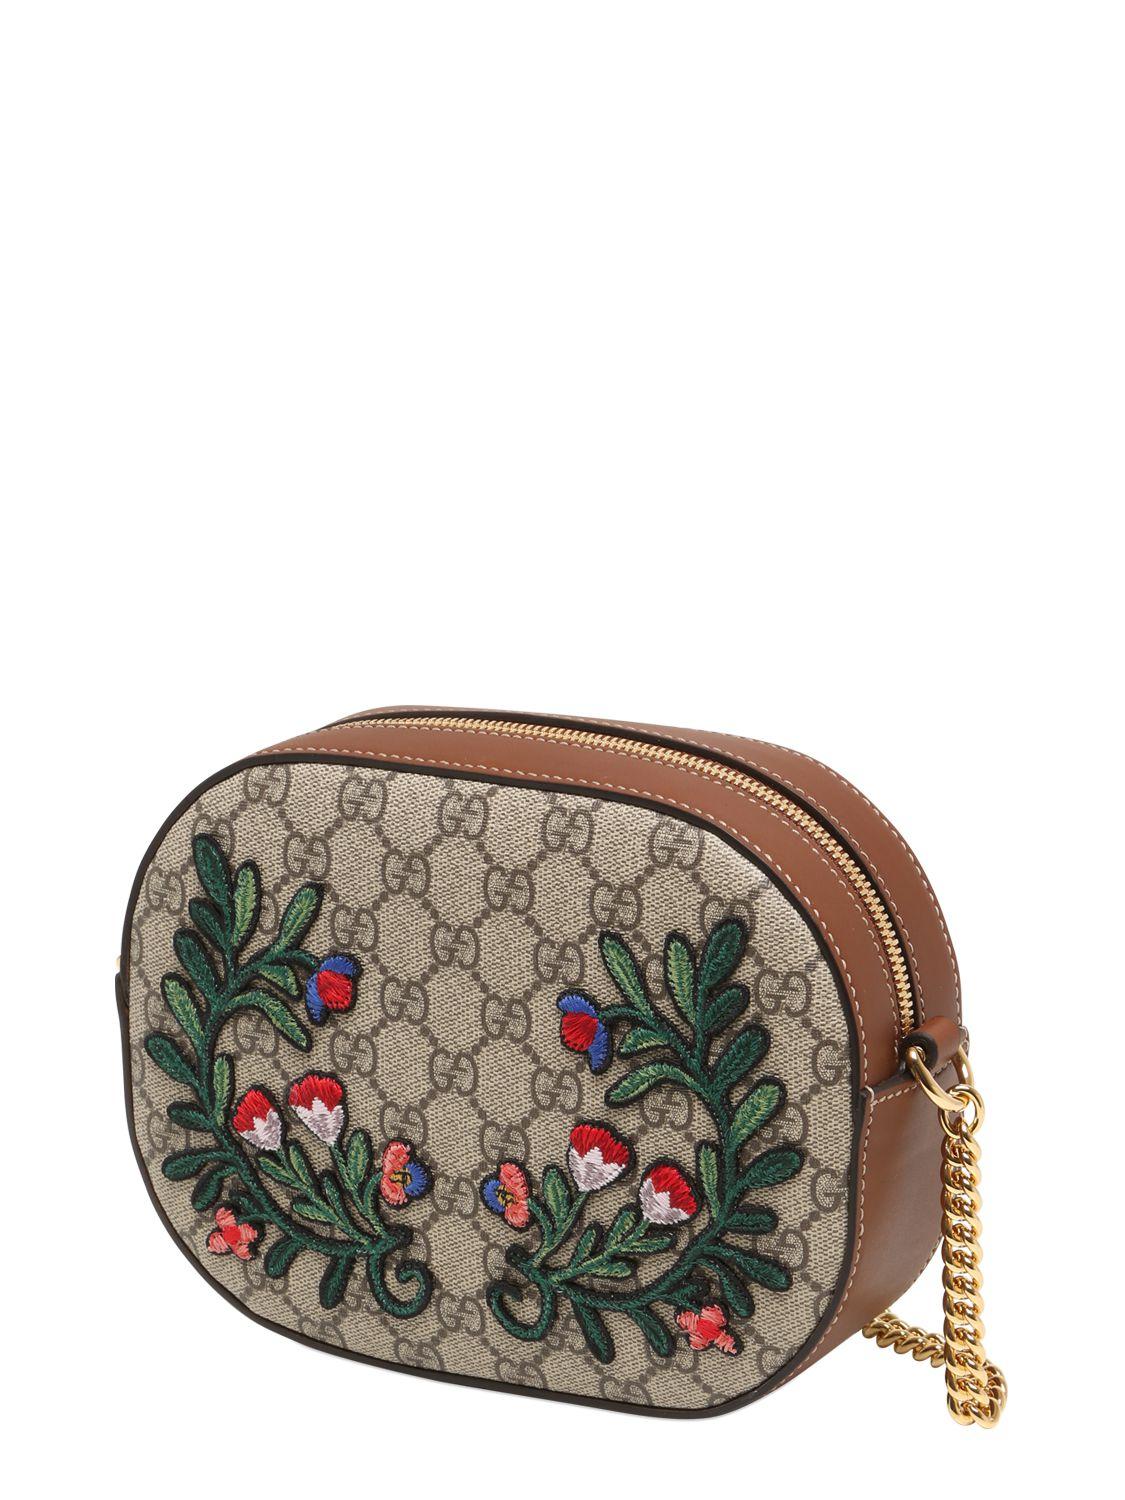 Lyst - Gucci Flower Patches Gg Supreme Camera Bag